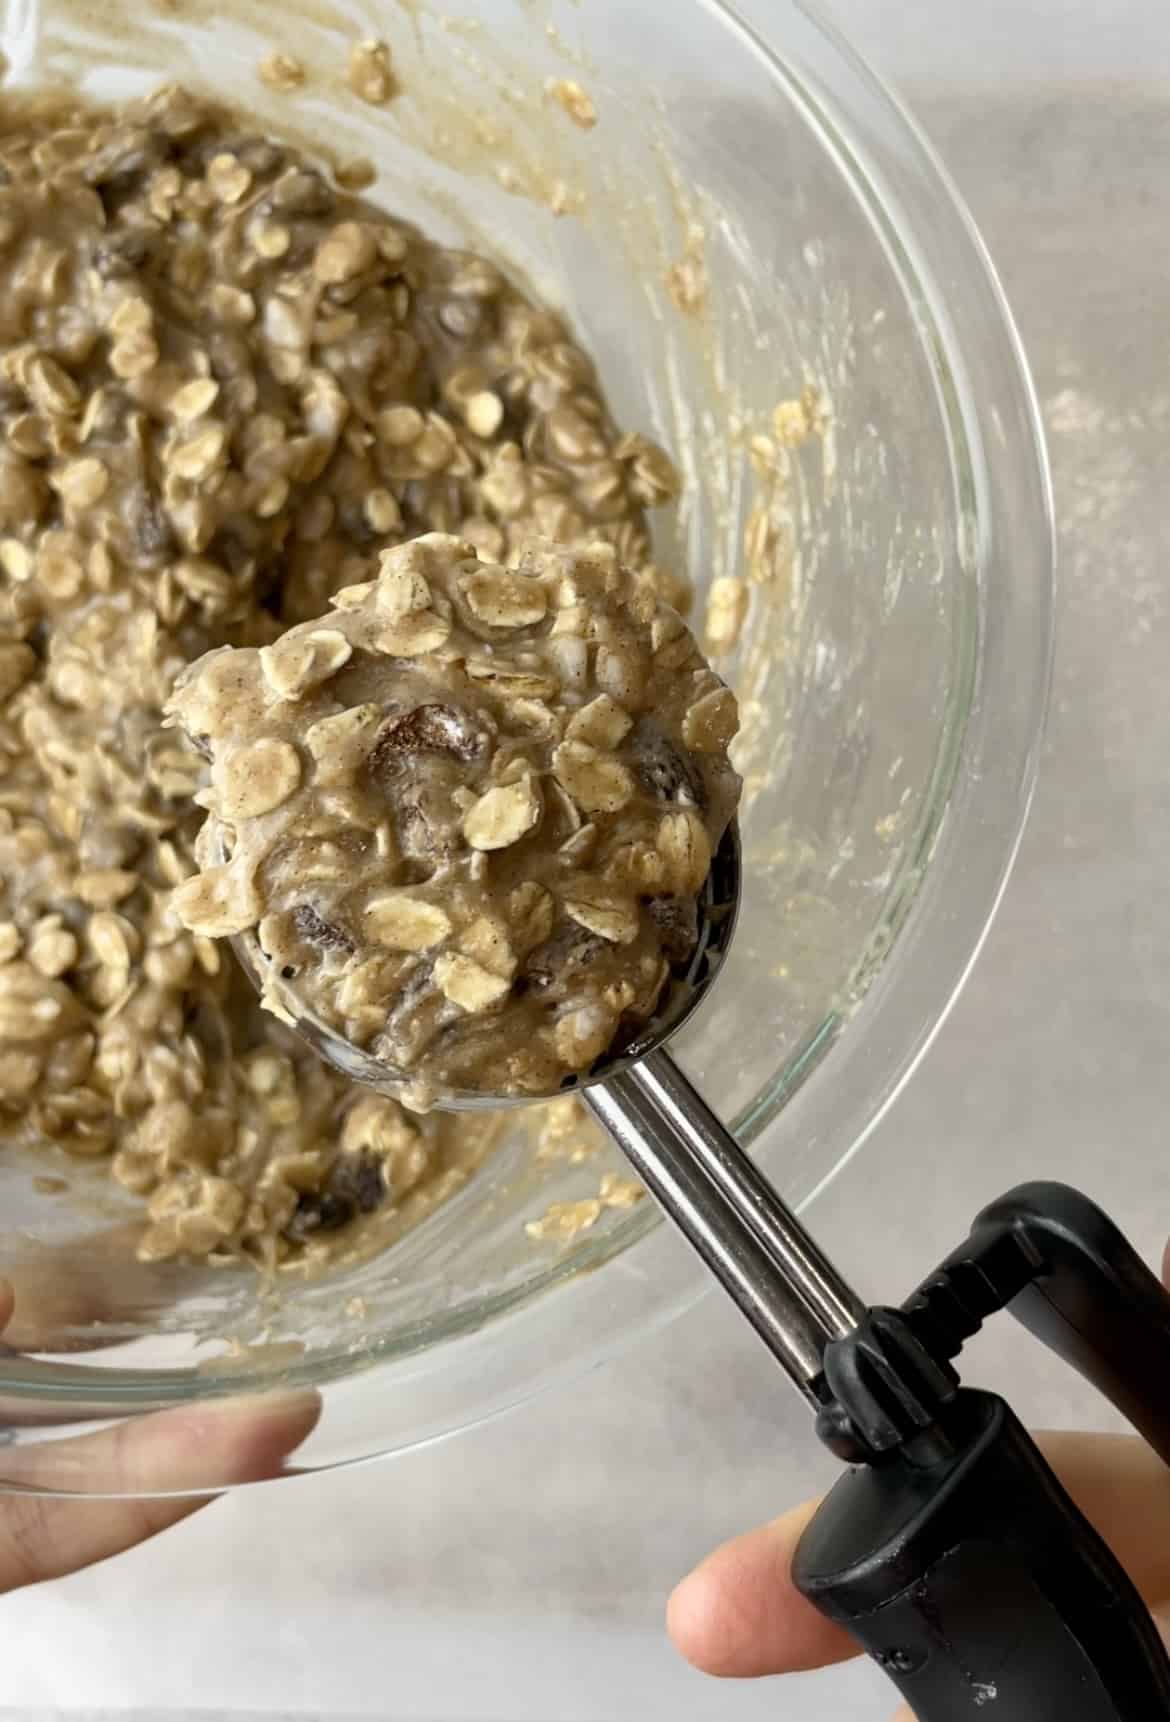 Some oatmeal raisin cookie dough being scooped out of the transparent glass bowl.